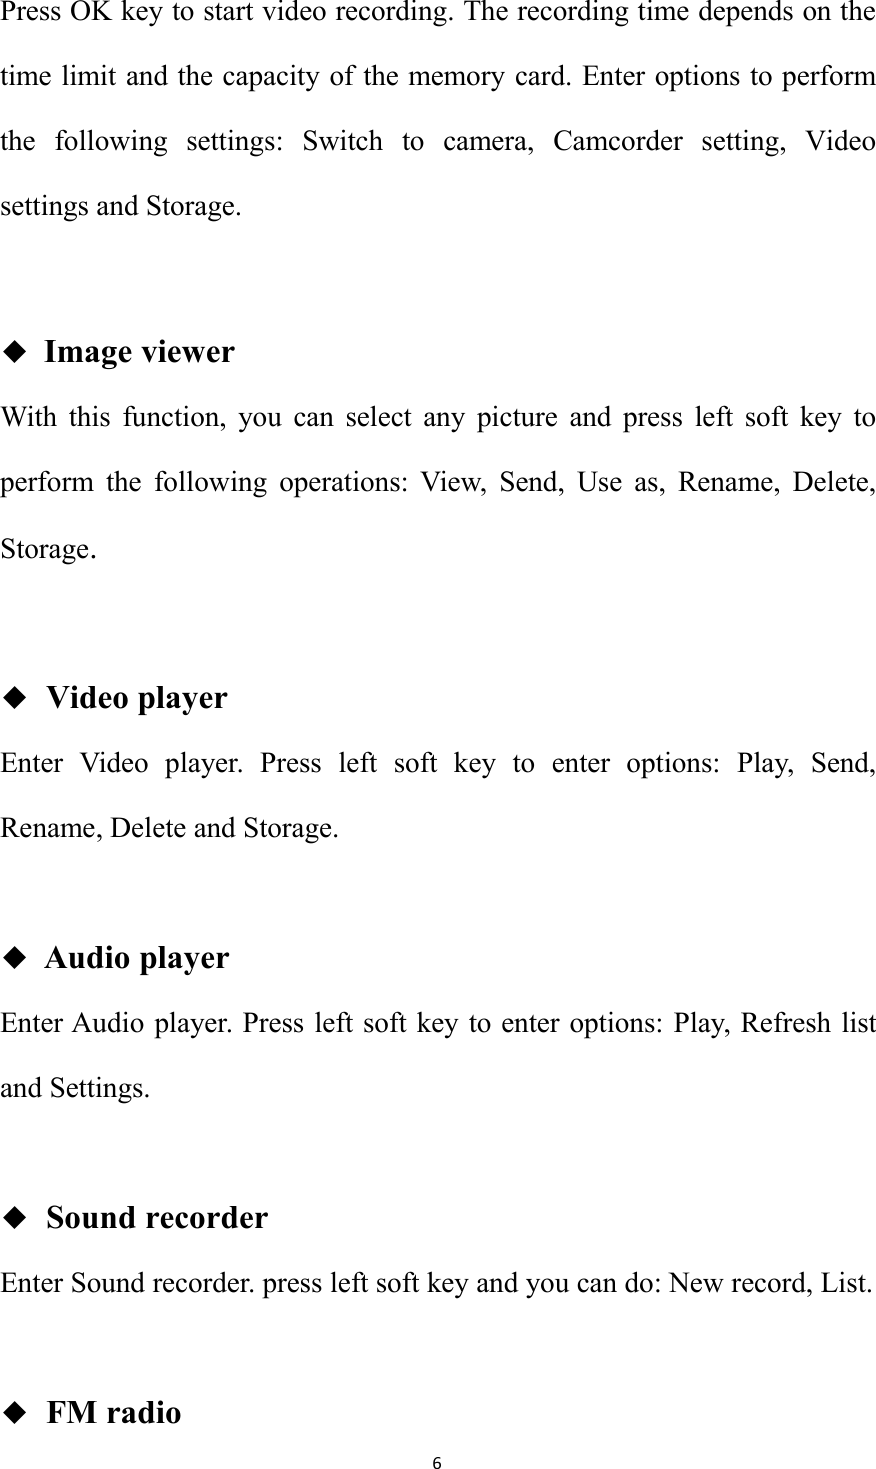 6Press OK key to start video recording. The recording time depends on thetime limit and the capacity of the memory card. Enter options to performthe following settings: Switch to camera, Camcorder setting, Videosettings and Storage.◆Image viewerWith this function, you can select any picture and press left soft key toperform the following operations: View, Send, Use as, Rename, Delete,Storage.◆Video playerEnter Video player. Press left soft key to enter options: Play, Send,Rename, Delete and Storage.◆Audio playerEnter Audio player. Press left soft key to enter options: Play, Refresh listand Settings.◆Sound recorderEnter Sound recorder. press left soft key and you can do: New record, List.◆FM radio